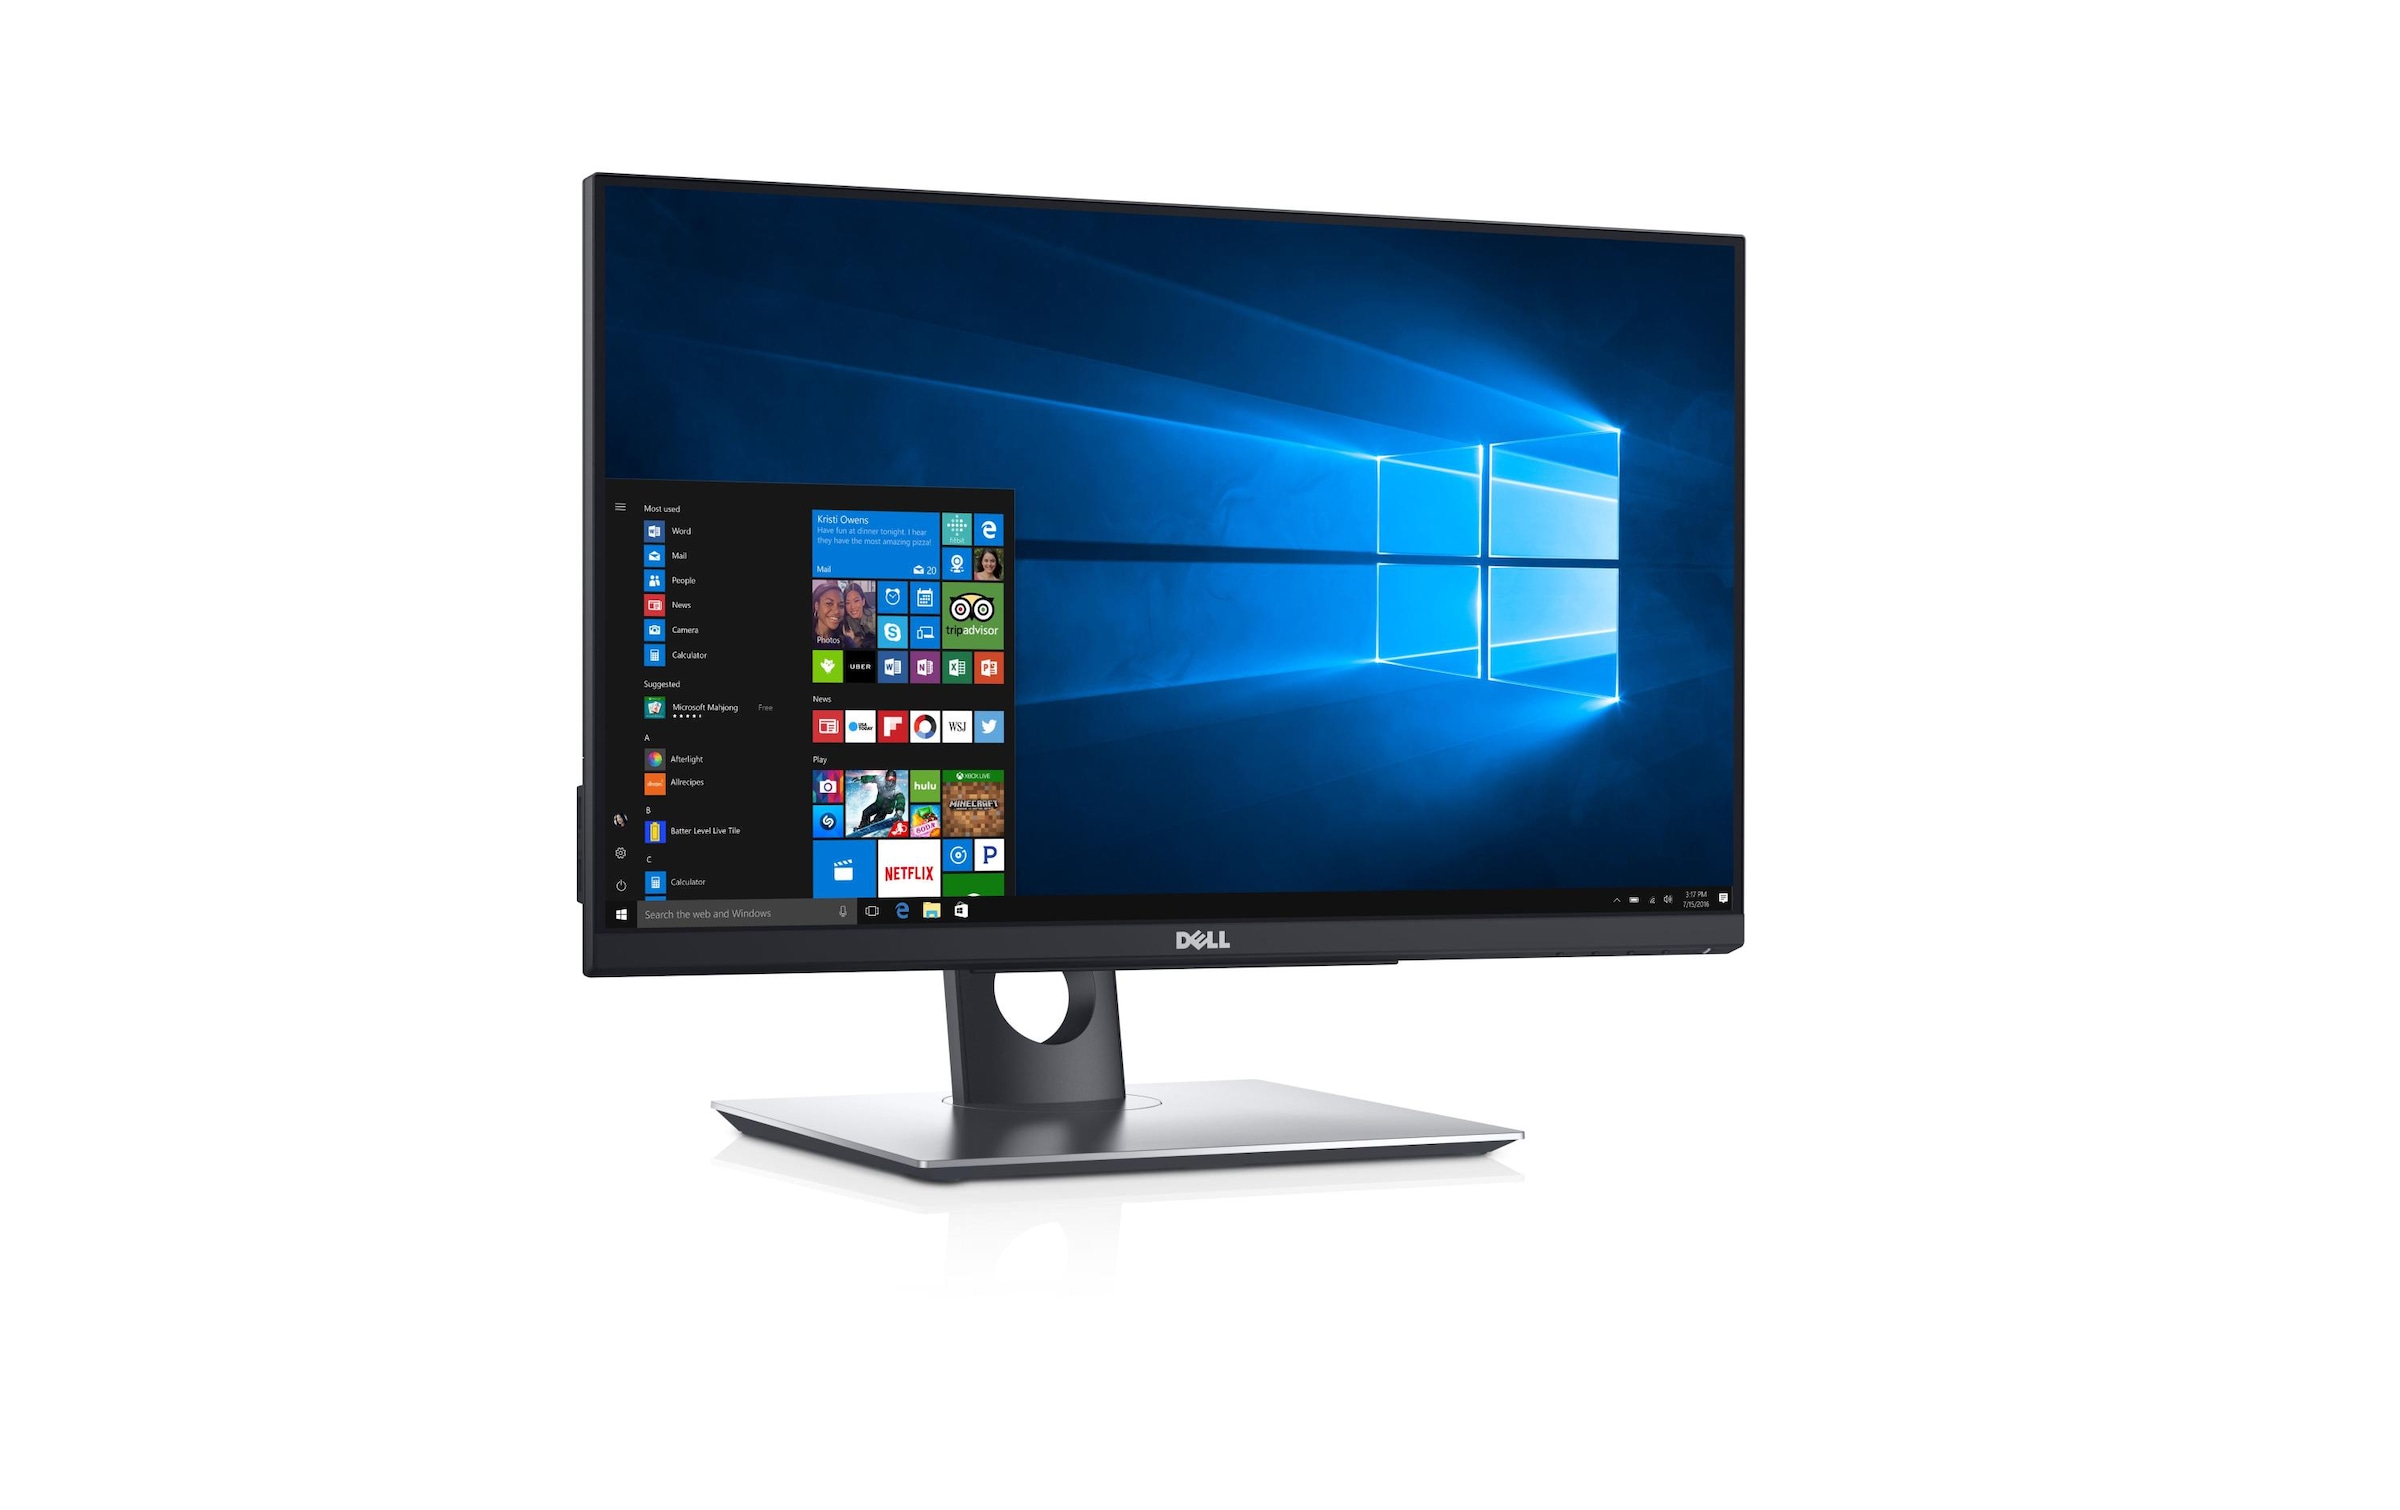 Dell LCD-Monitor »P2418HT«, 60,5 cm/23,8 Zoll, 1920 x 1080 px